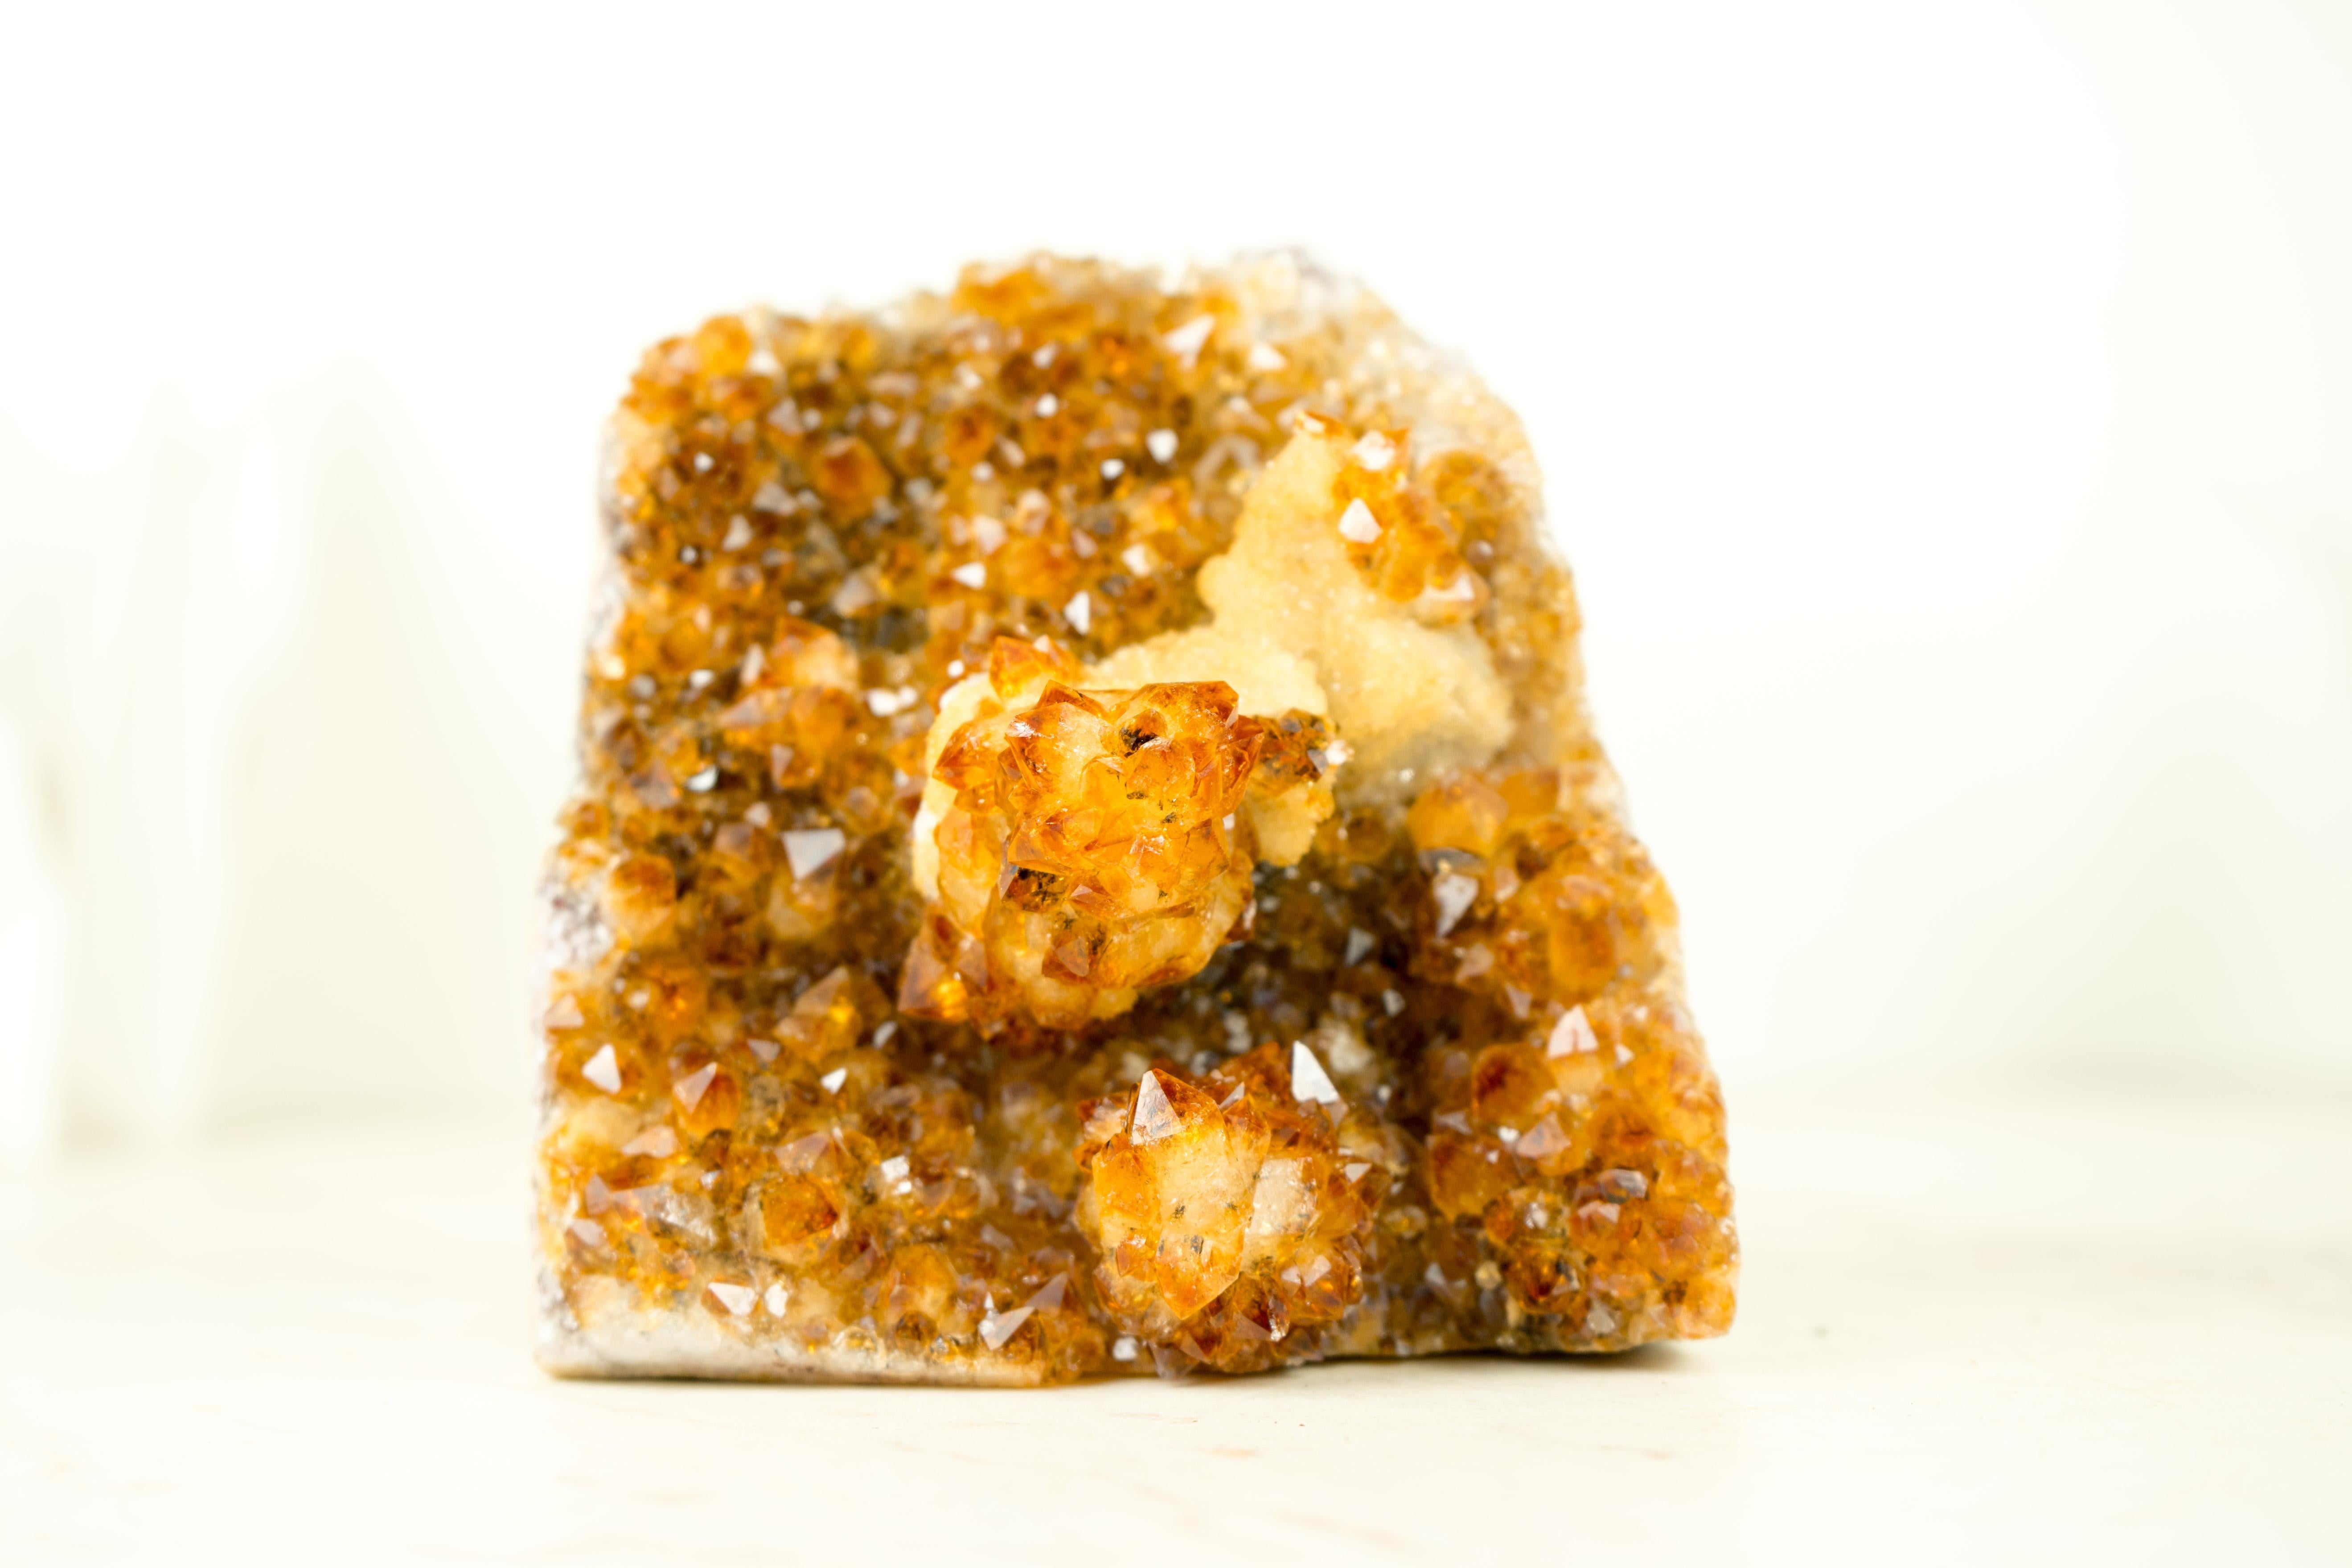 Small Citrine Cluster with Stalactite Flower and Calcite, The Perfect November Crystal 

▫️ Description

A Small Premium Citrine Cluster brings world-class color, a rare stalactite flower, and geometric calcite. These characteristics form the